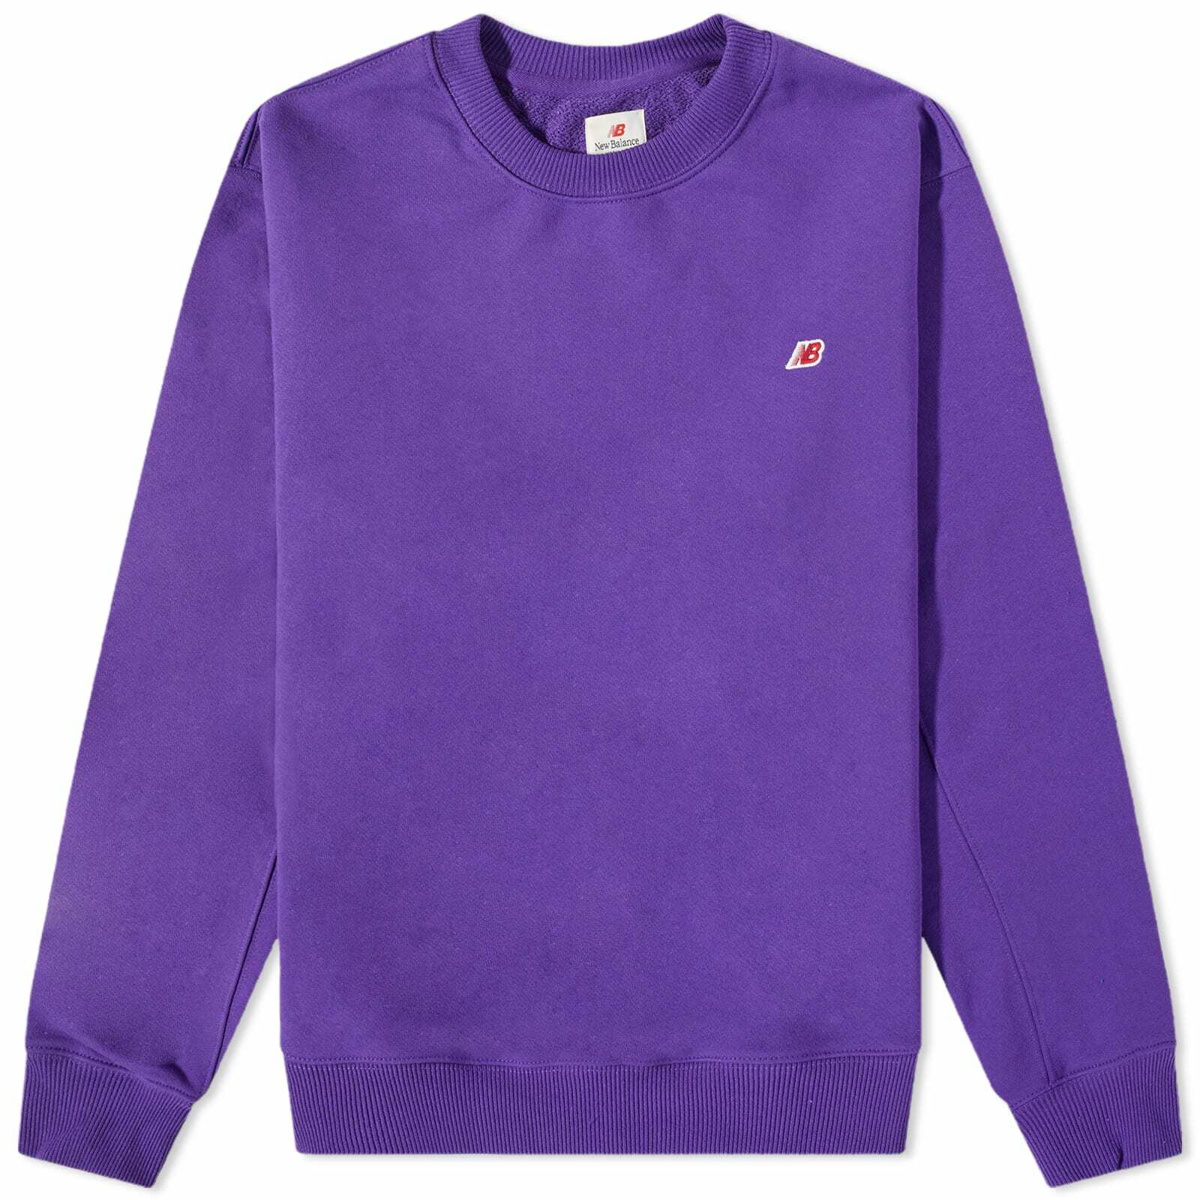 New Balance Men's Made in USA Core Crew Sweat in Prism Purple New